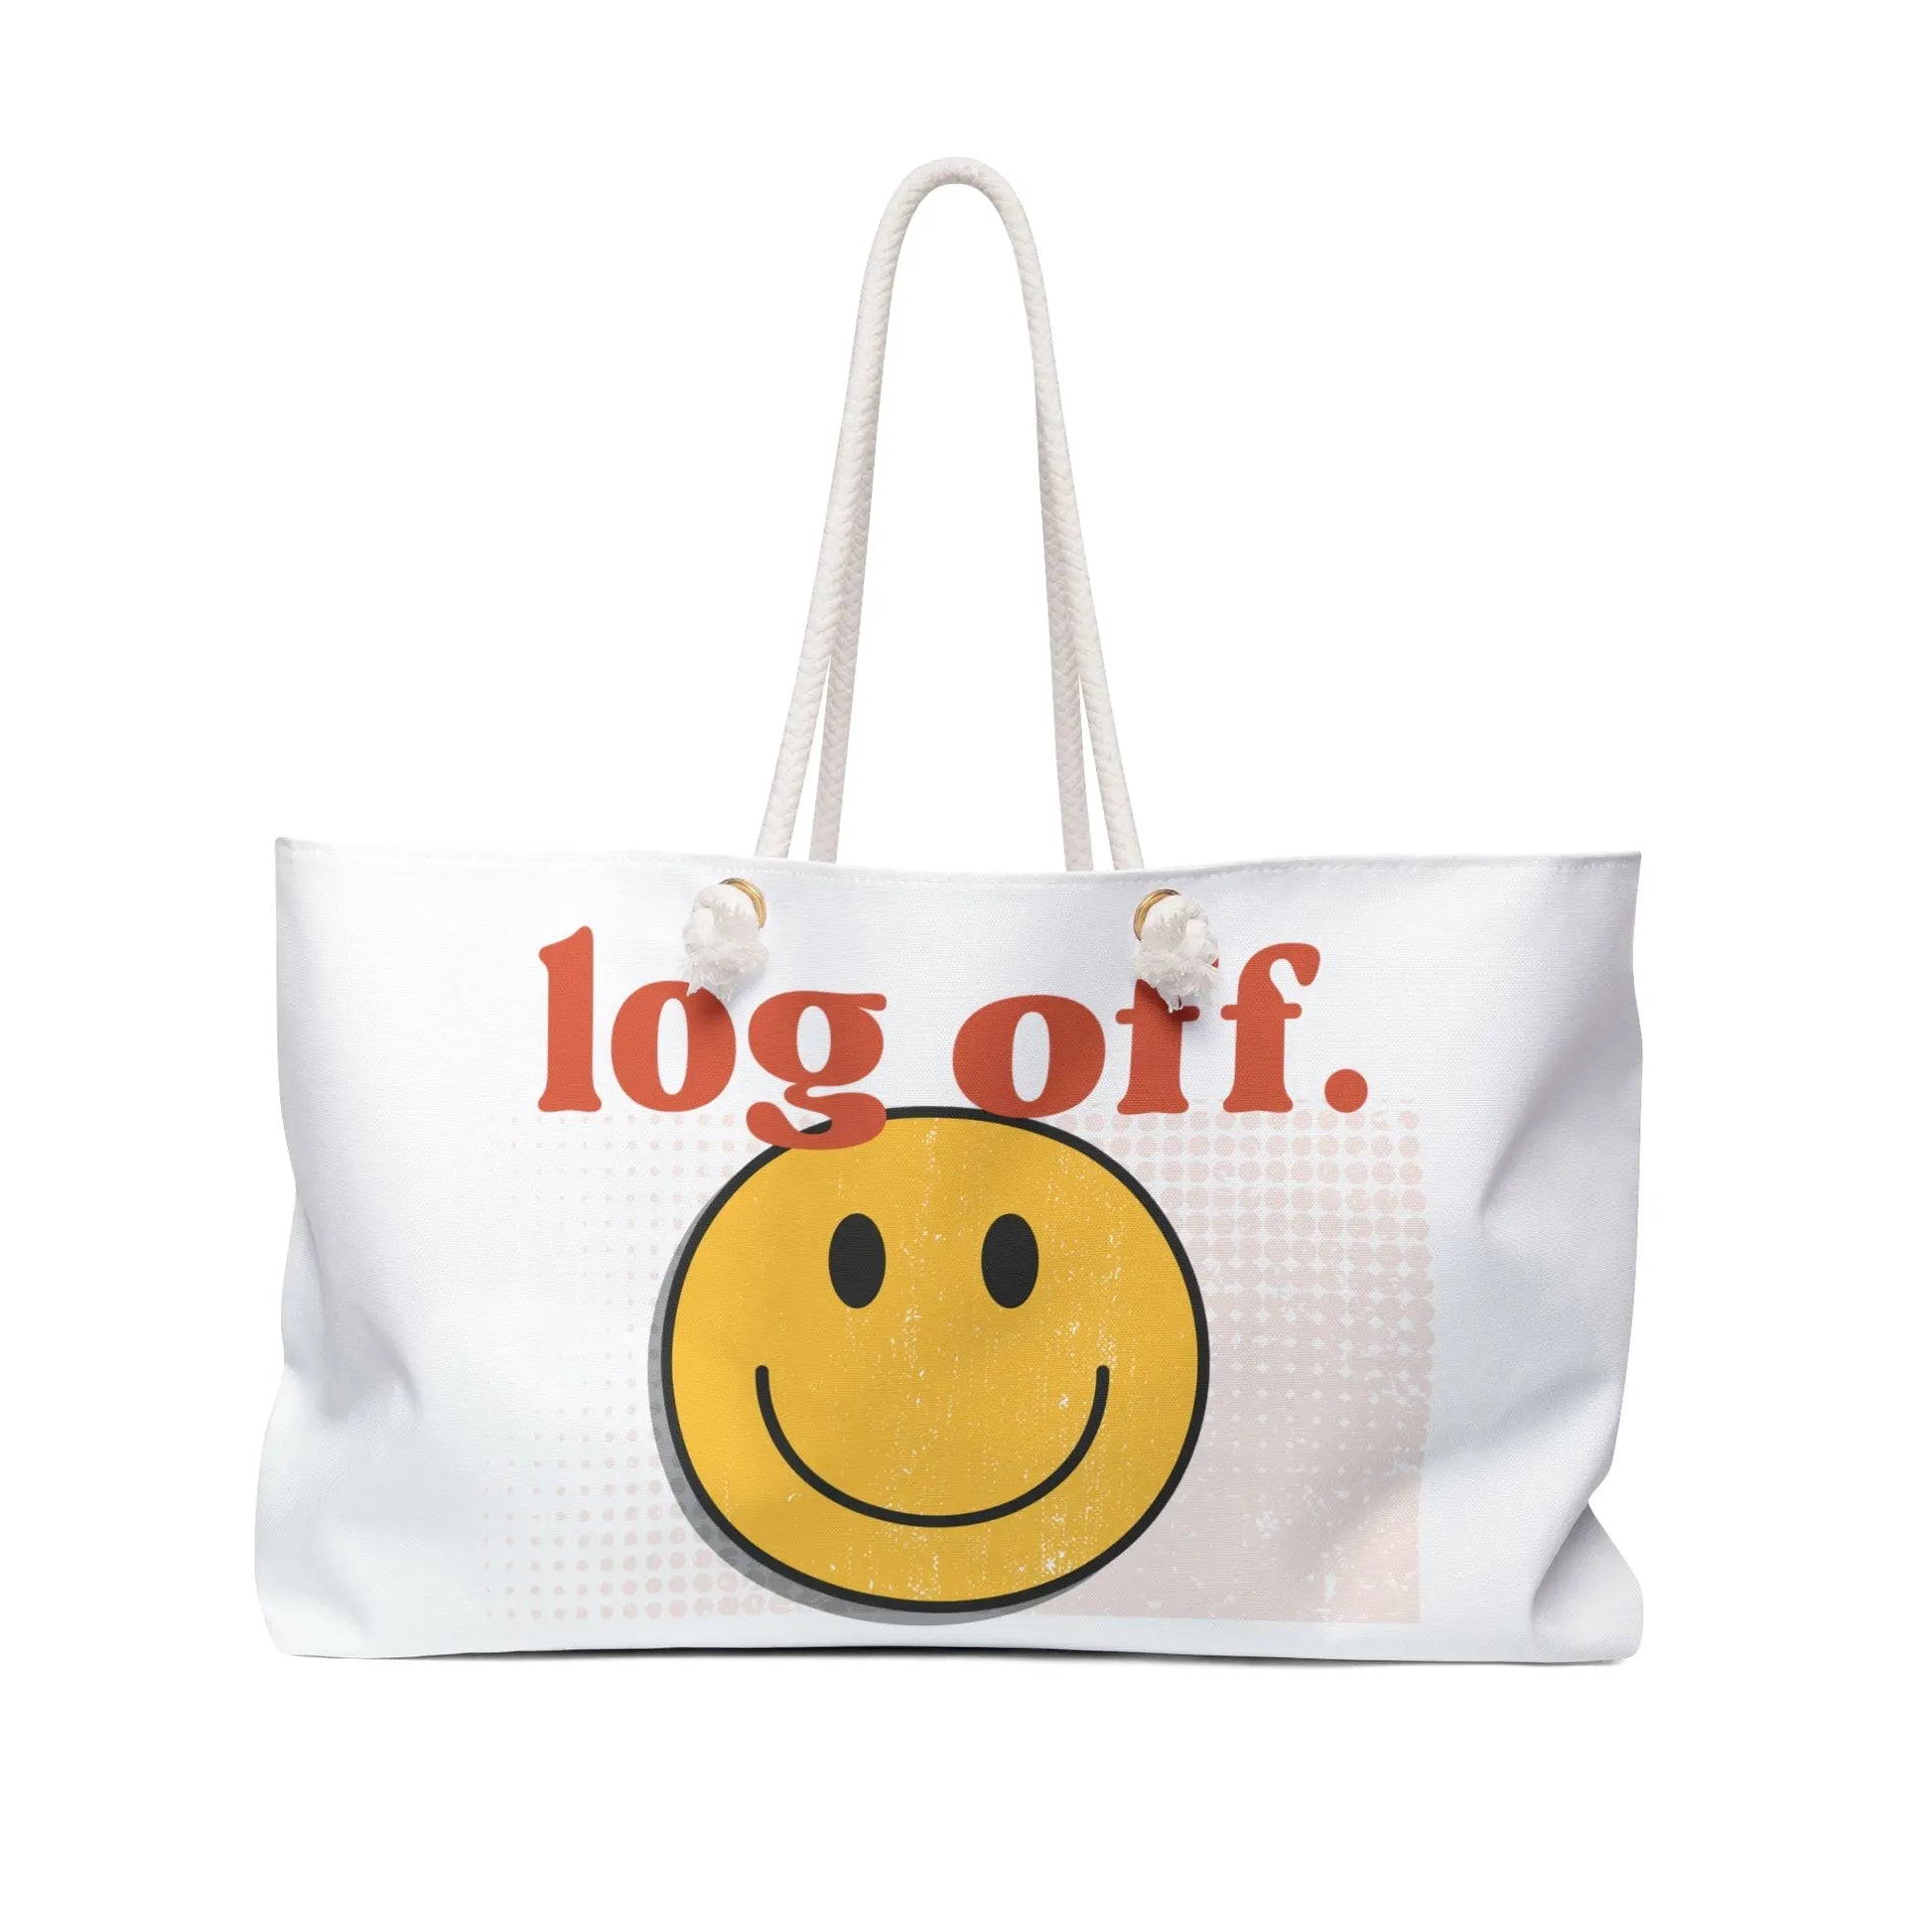 Disconnect and Reconnect - Retro 'Log Off' Smiley Face Weekend Overnight Bag - papercraneco